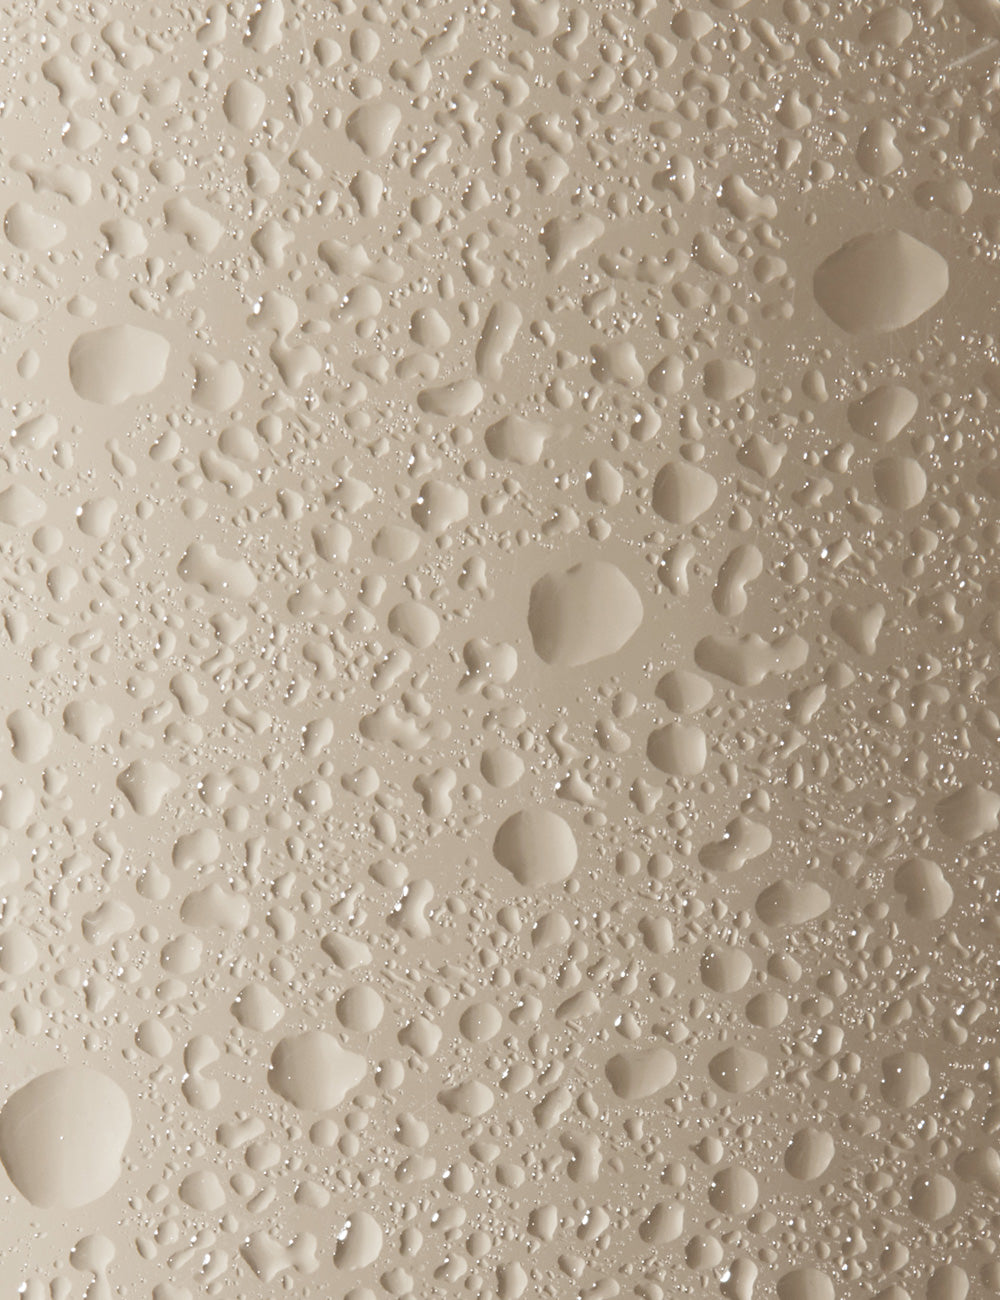 Close-up photo of toning mist droplets.